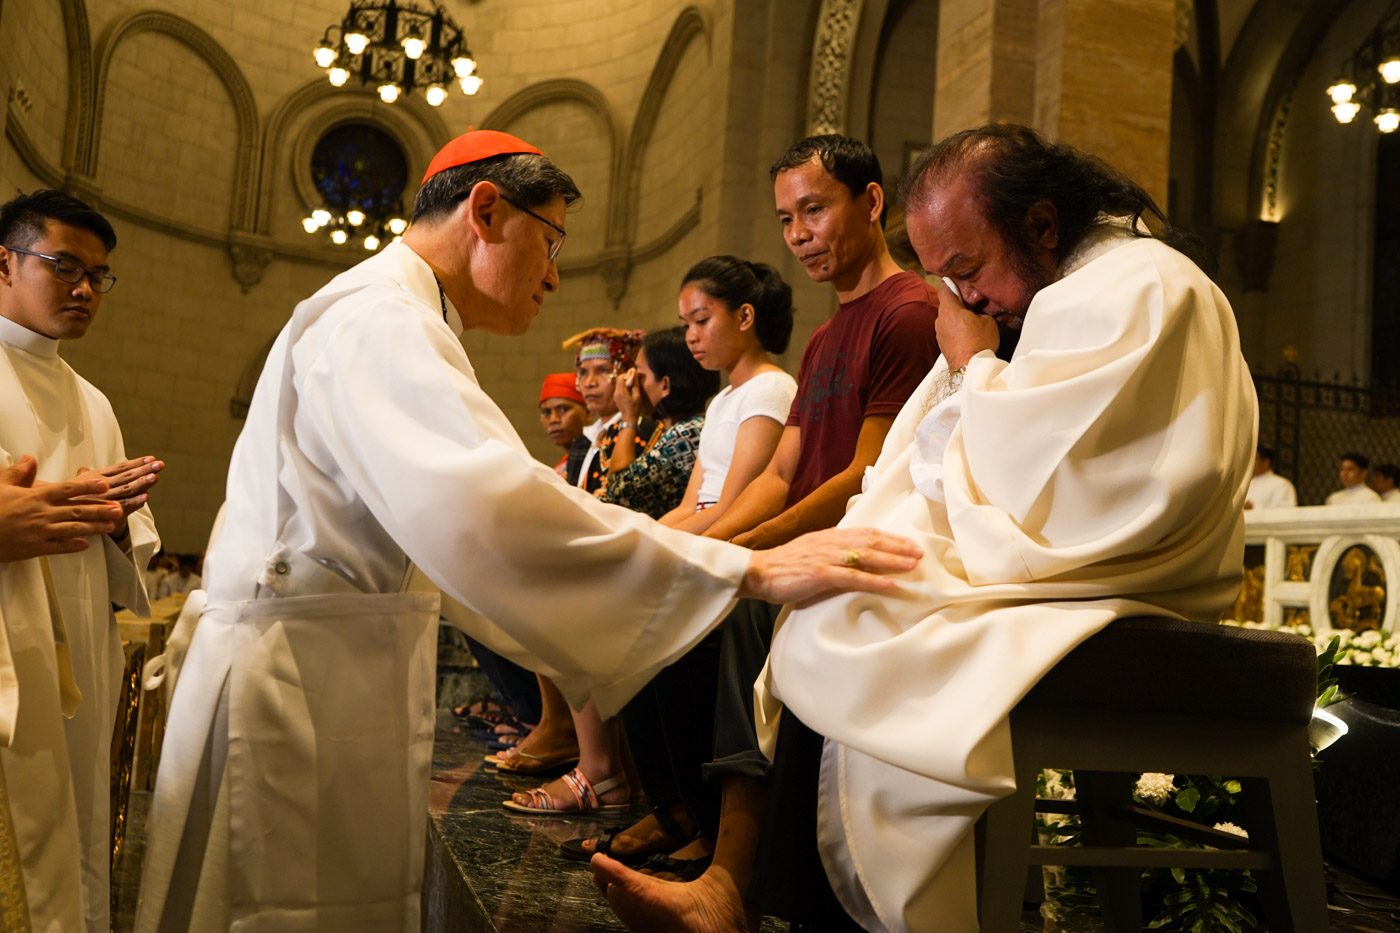 EMOTIONAL MOMENT. Rescued Marawi priest Father Chito Soganub cries as Manila Archbishop Luis Antonio Cardinal Tagle washes his feet on Maundy Thursday, March 29, 2018. Photo by Maria Tan/Rappler 